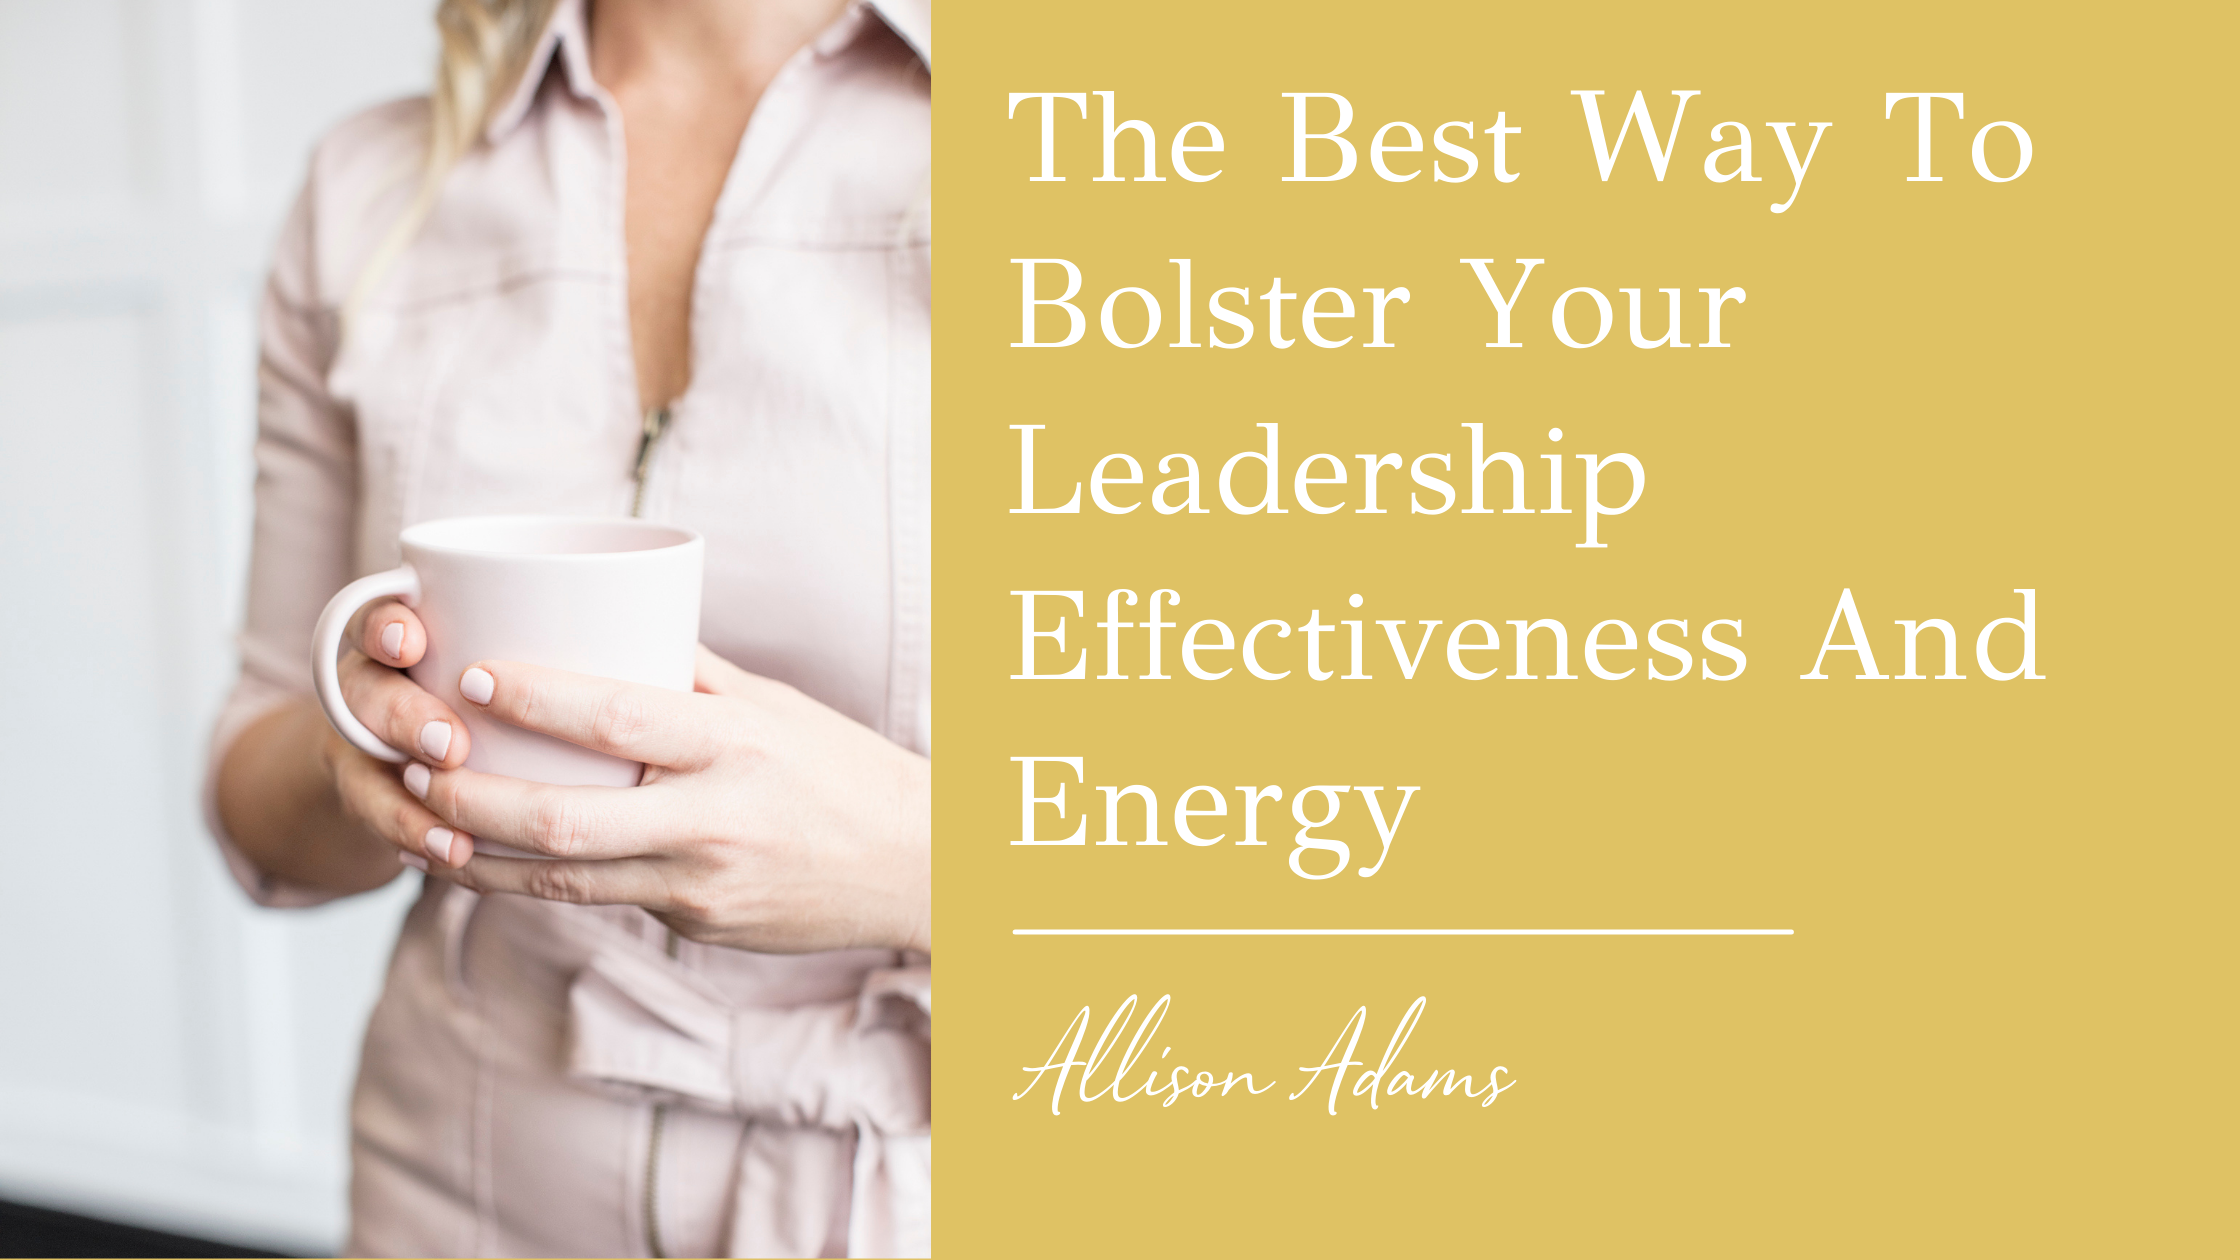 The Best Way To Bolster Your Leadership Effectiveness and Energy